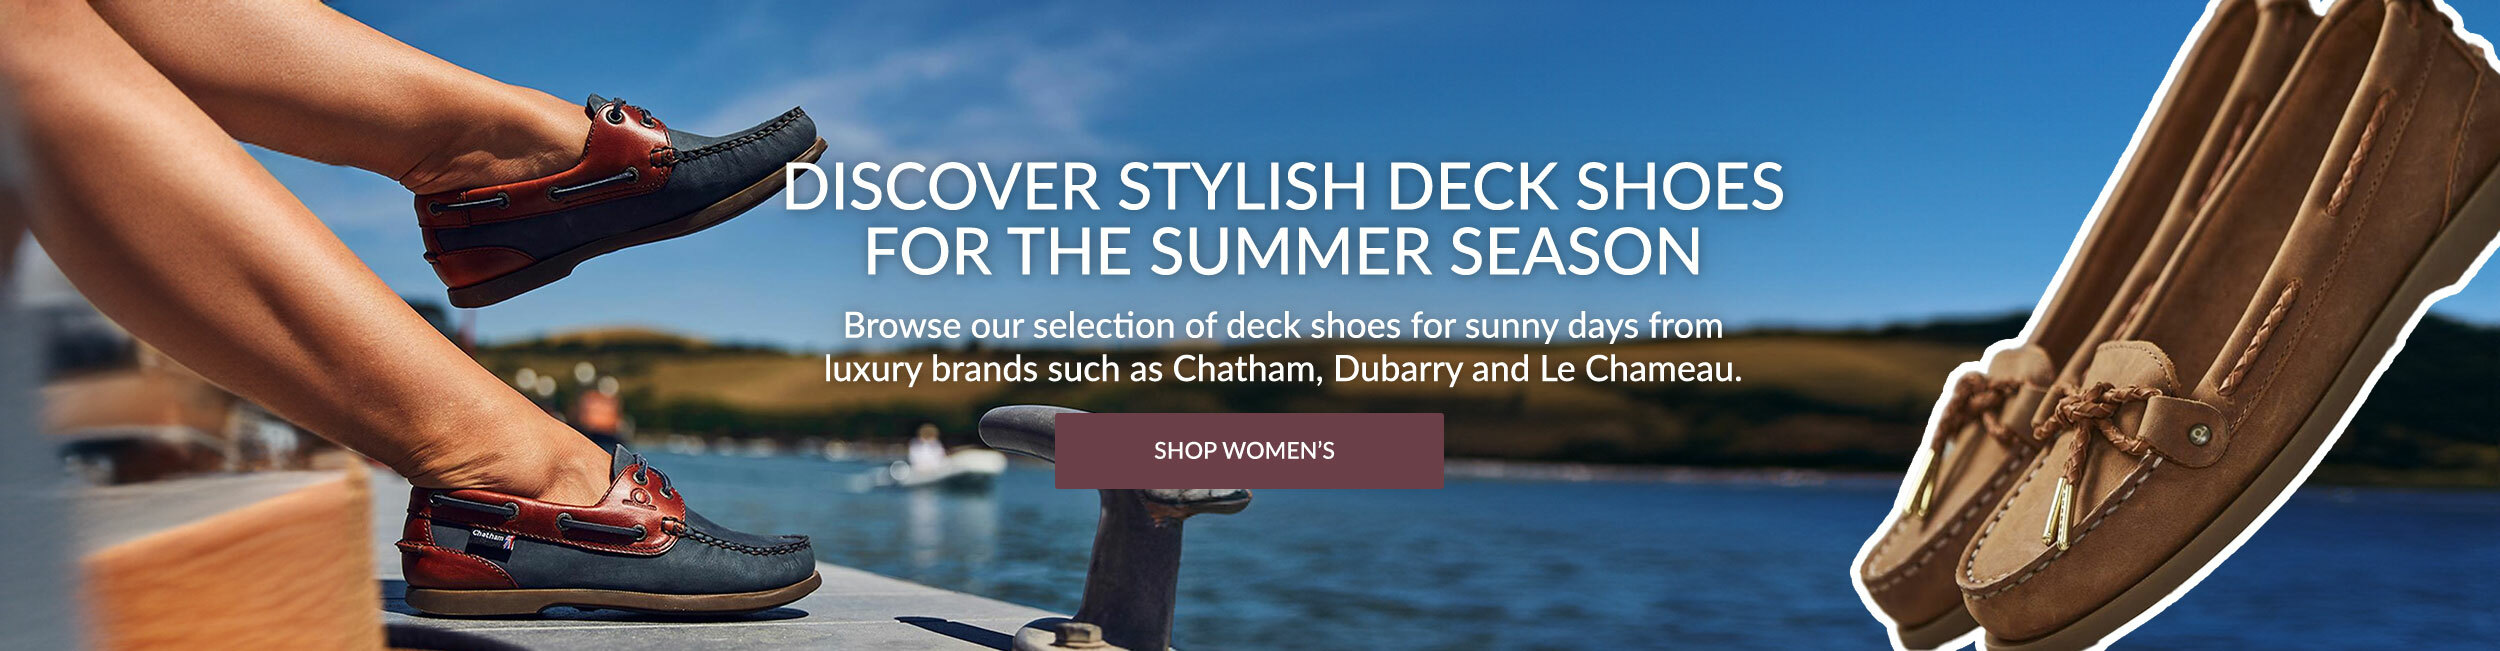 Discover Stylish Deck Shoes For Women